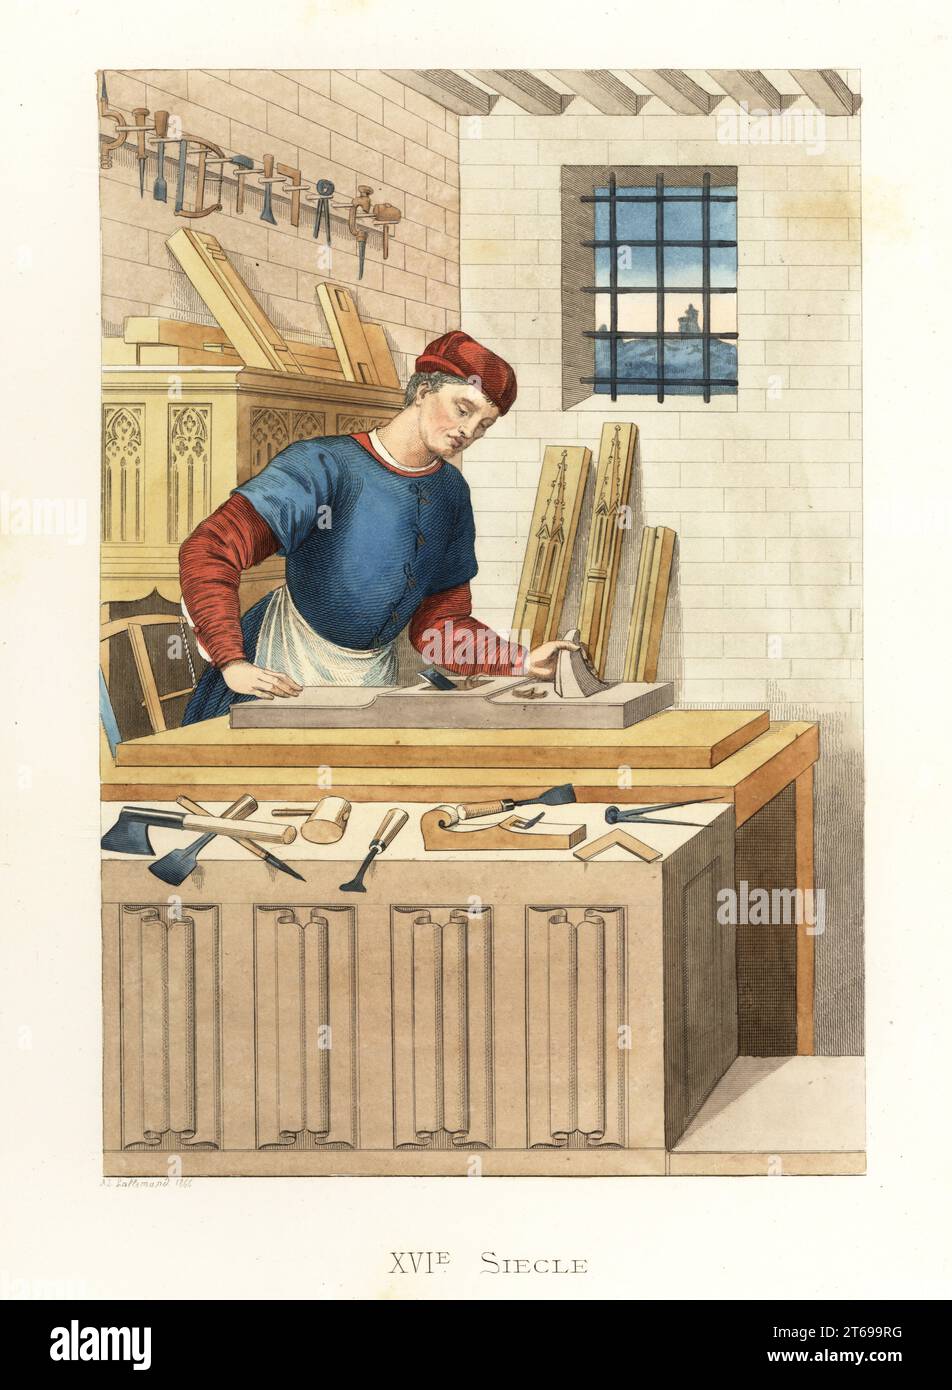 Costume of a French joiner in his workshop, 16th century. In rred toque cap and justaucorps, blue vest fastened with black knots. He works with a plane on a large plank of oak. On the bench, chisels, right angle, compass, plane, mallet, axe, etc. Artisan Francais. After a contemporary miniature. Handcolored lithograph after an illustration by Edmond Lechevallier-Chevignard from Georges Duplessis's Costumes historiques des XVIe, XVIIe et XVIIIe siecles (Historical costumes of the 16th, 17th and 18th centuries), Paris, 1867. Edmond Lechevallier-Chevignard was an artist, book illustrator, and int Stock Photo